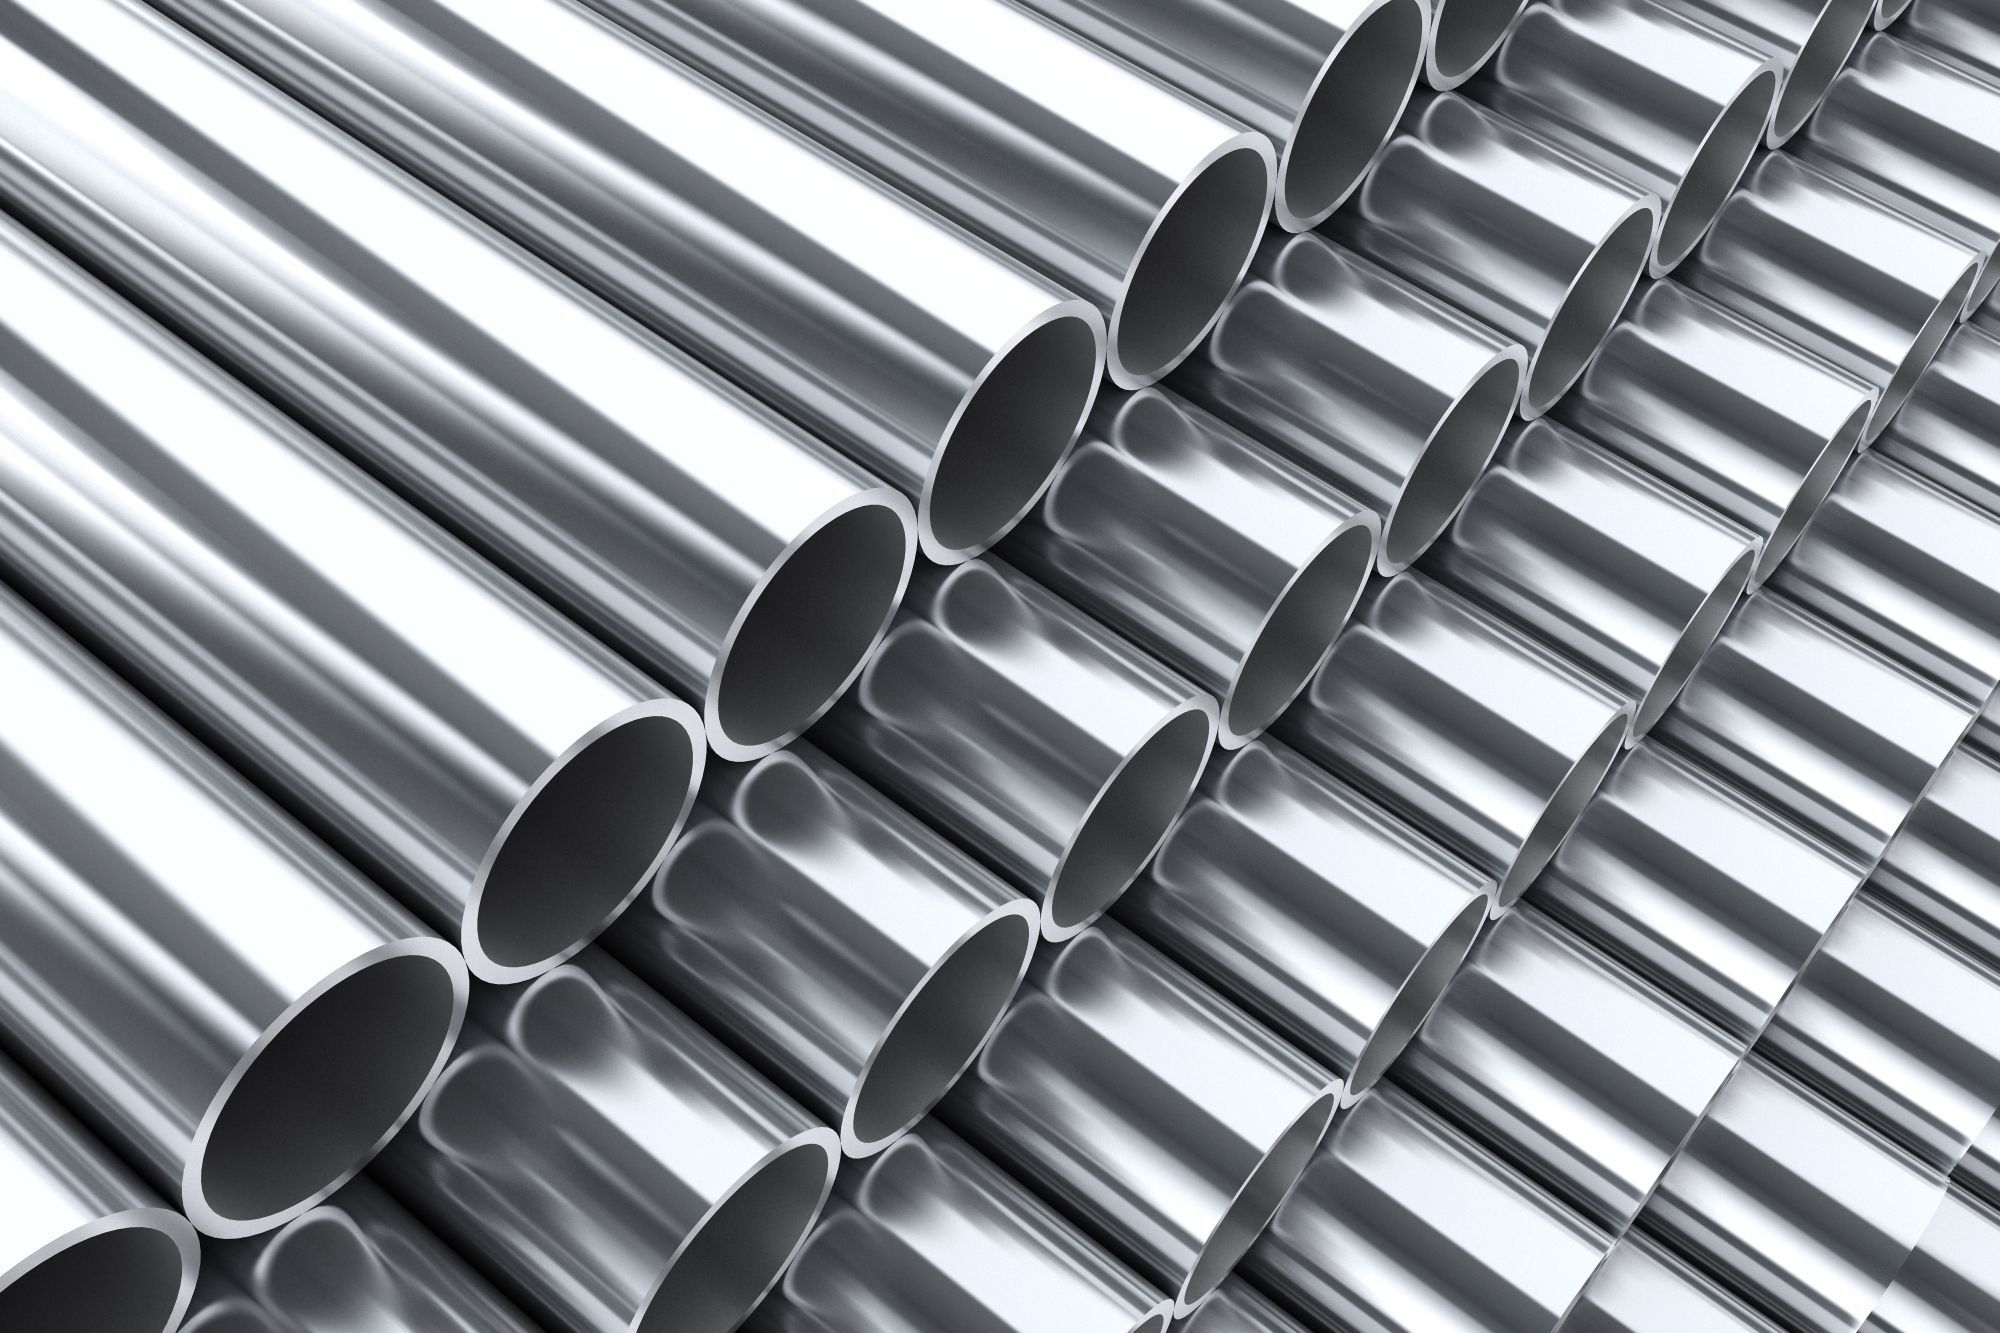 How To Choose The Right Stainless Steel Global Supplier For Your Business